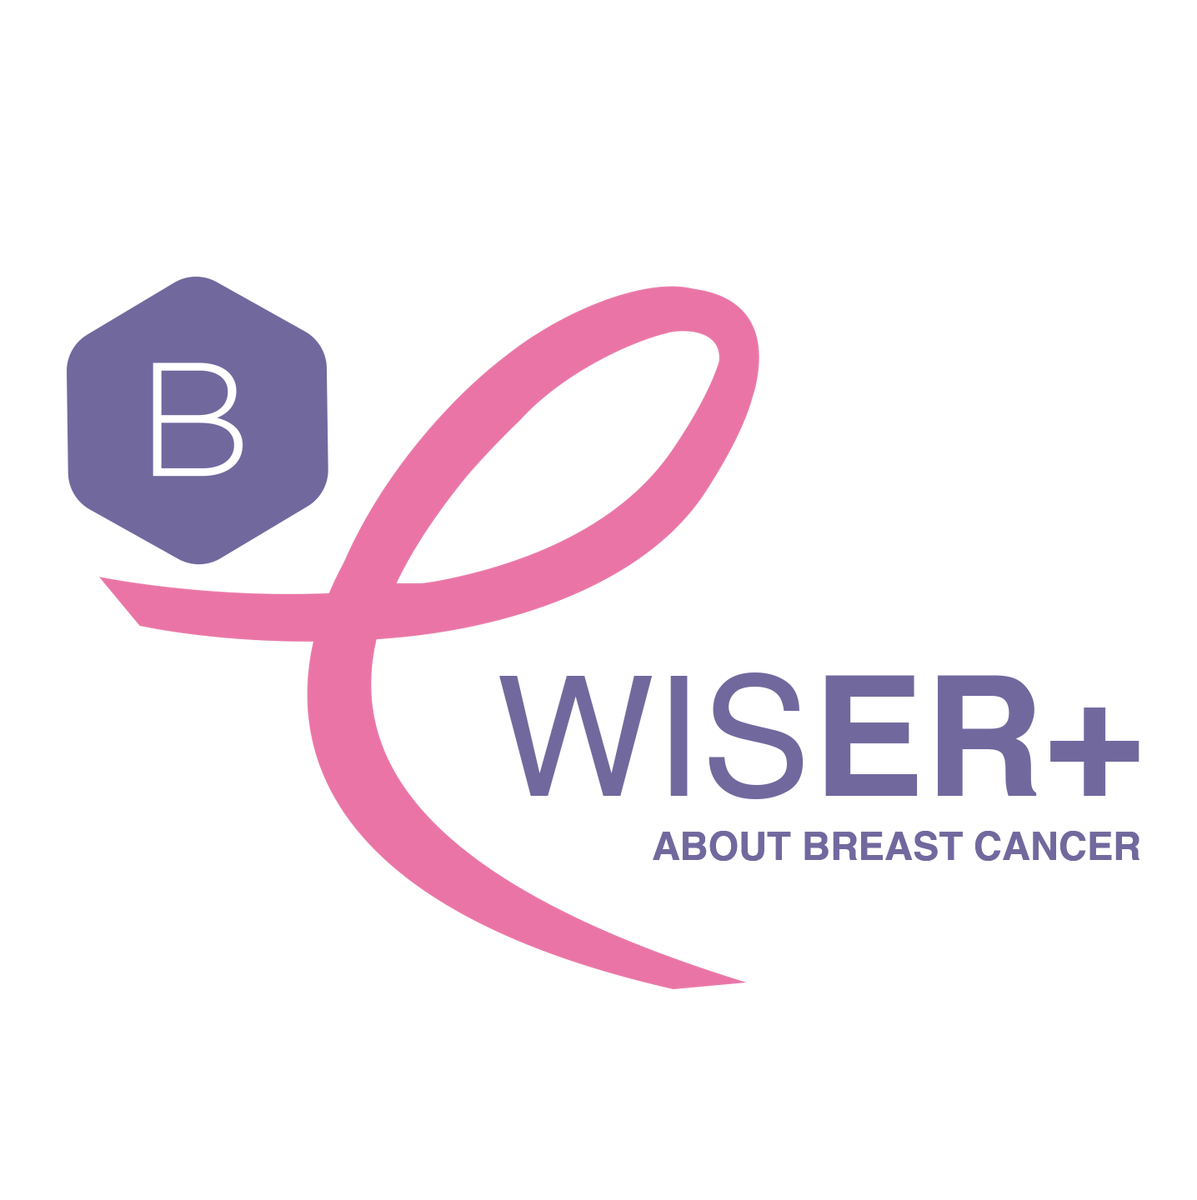 Learn how to personalize breast cancer treatments through a new campaign: bit.ly/1m7awVu